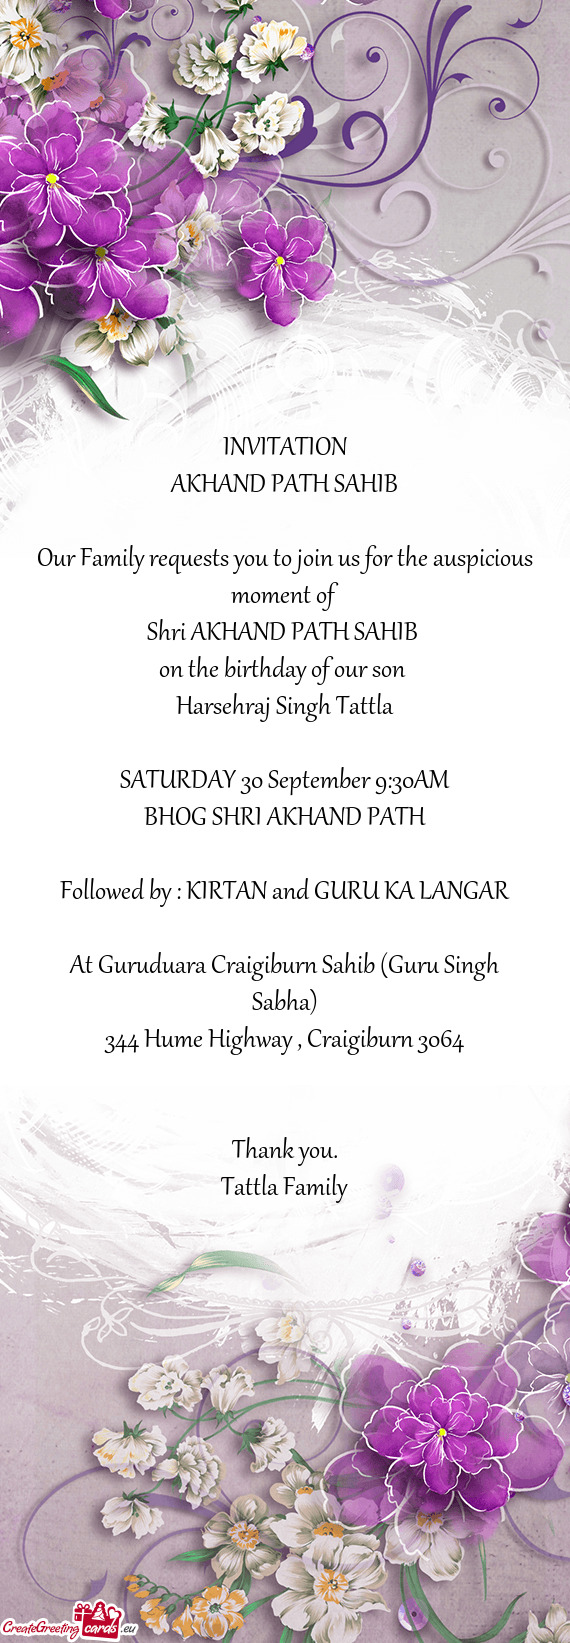 Our Family requests you to join us for the auspicious moment of